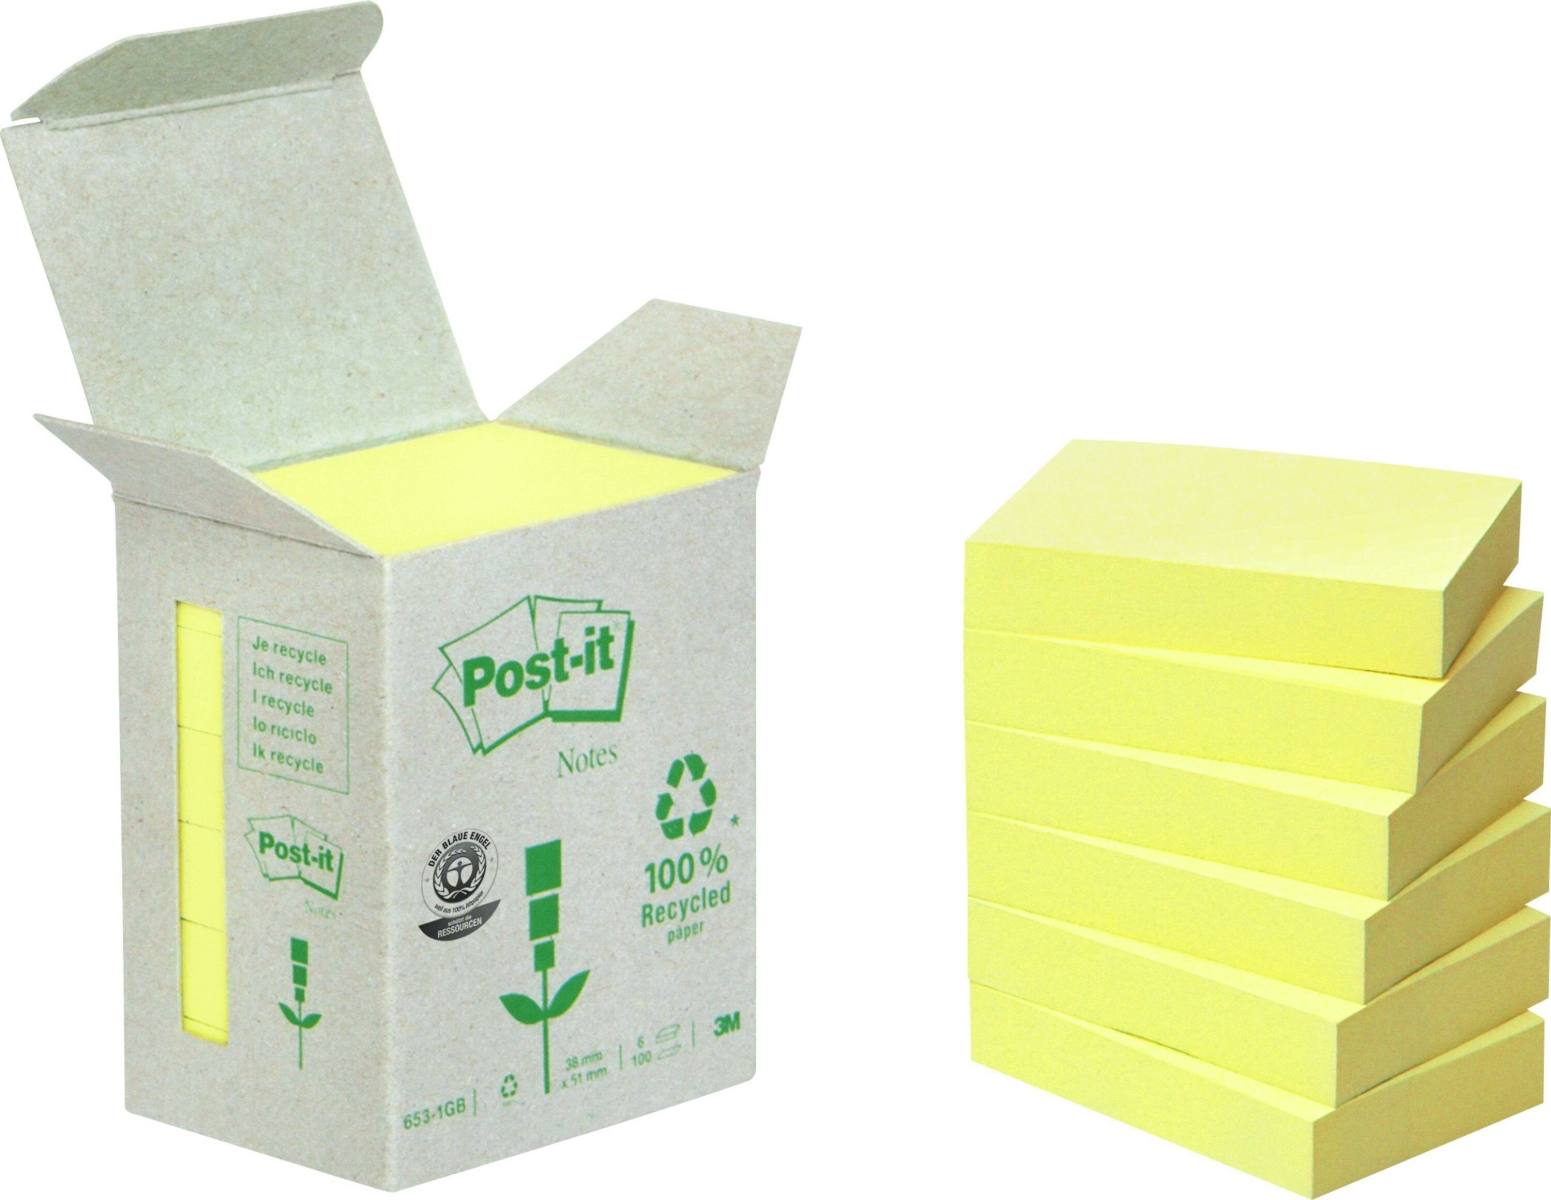 3M Post-it Recycling Notes 6531B, 51 mm x 38 mm, yellow, 6 pads of 100 sheets each